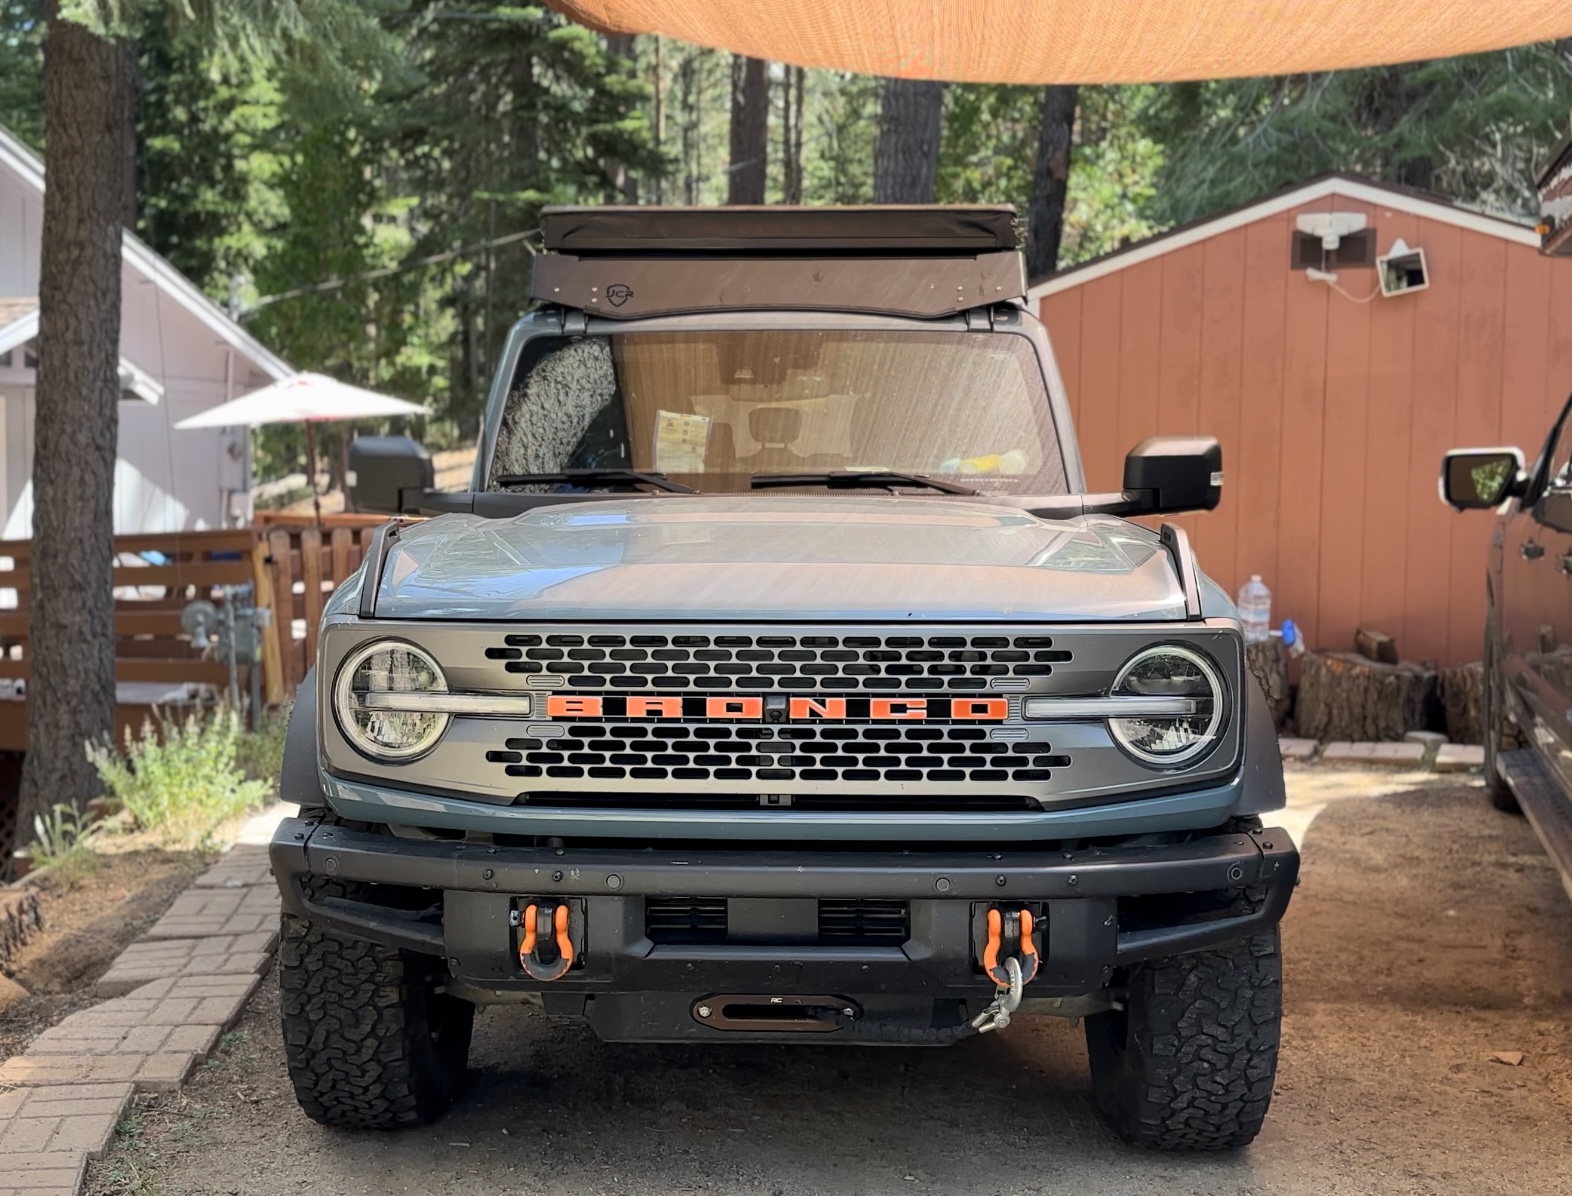 Ford Bronco Let's see your roof-top Tents and camping setups! IMG_4410